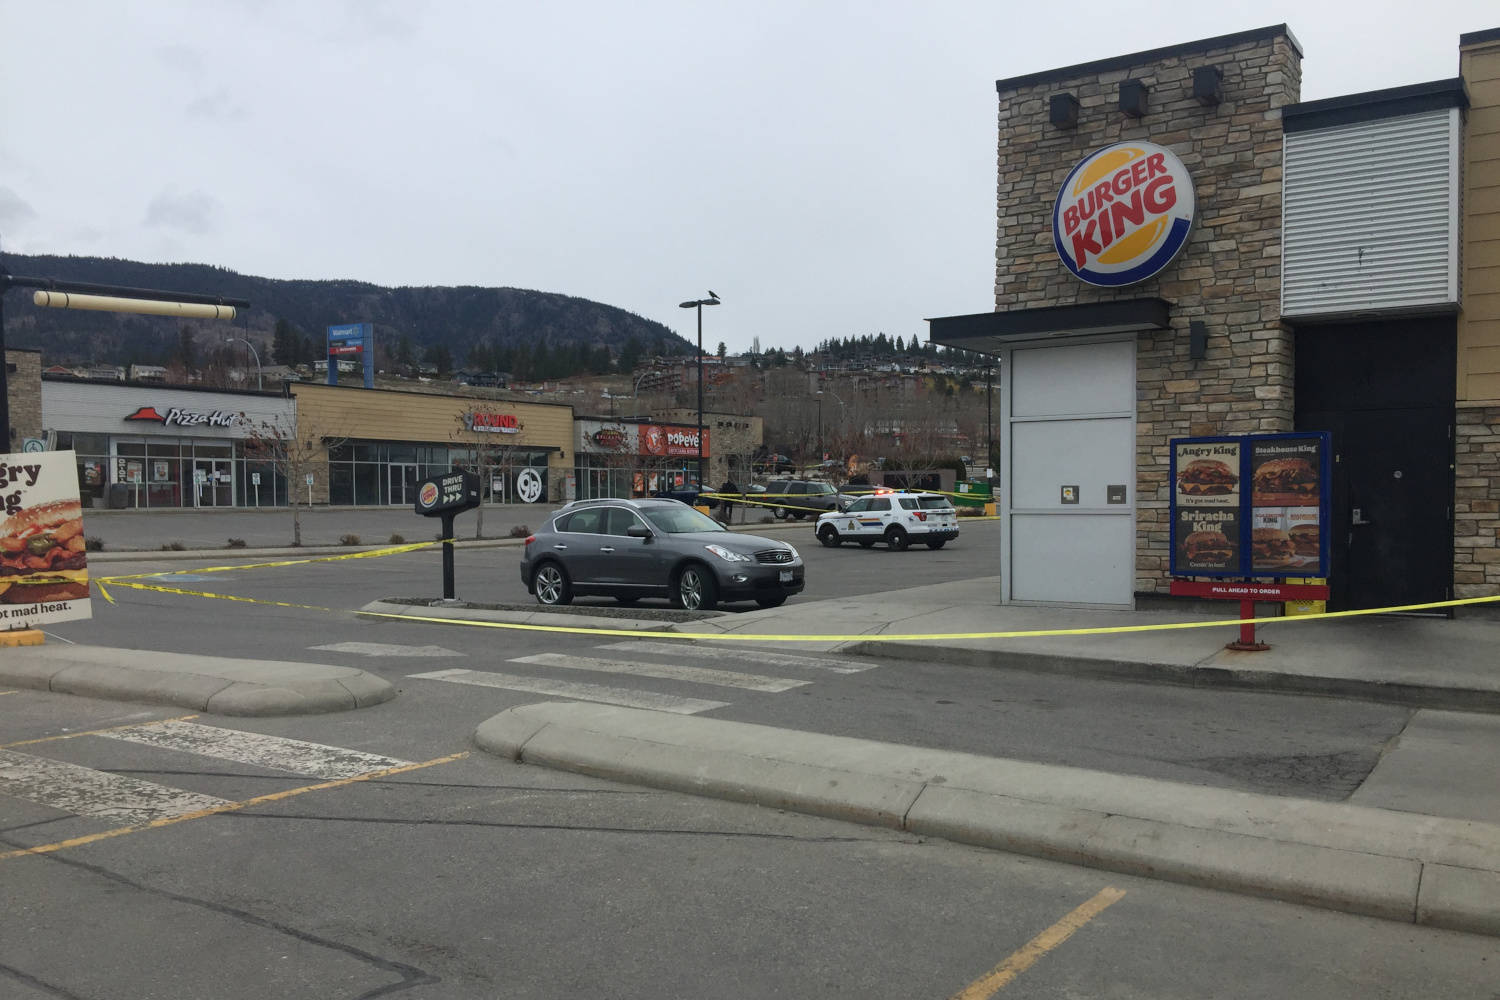 Police have cordoned off an area outside a West Kelowna strip mall near Highway 97 and Elk Road on Sunday morning. (Dave Ogilvie photo)